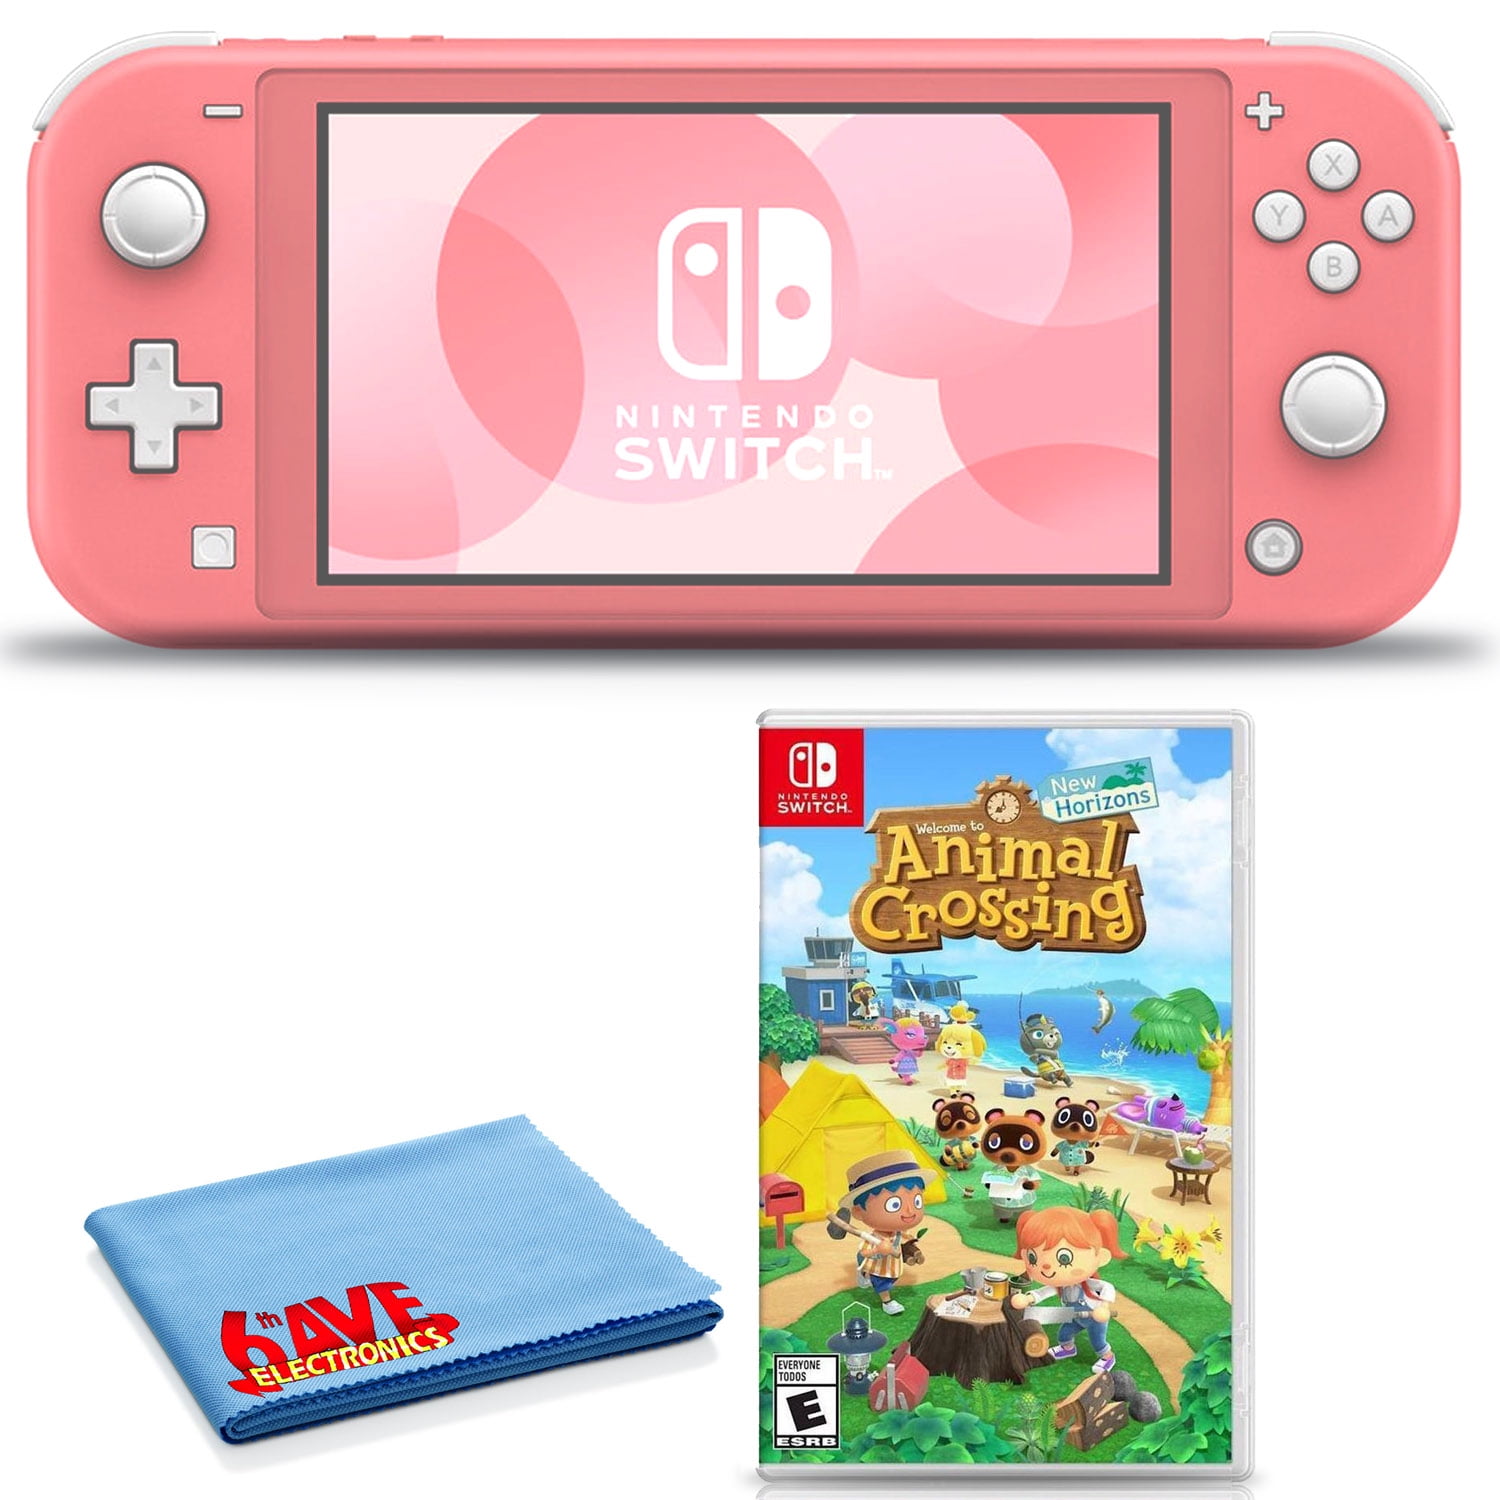 Nintendo Switch Lite (Coral) Bundle Includes Animal Crossing: New